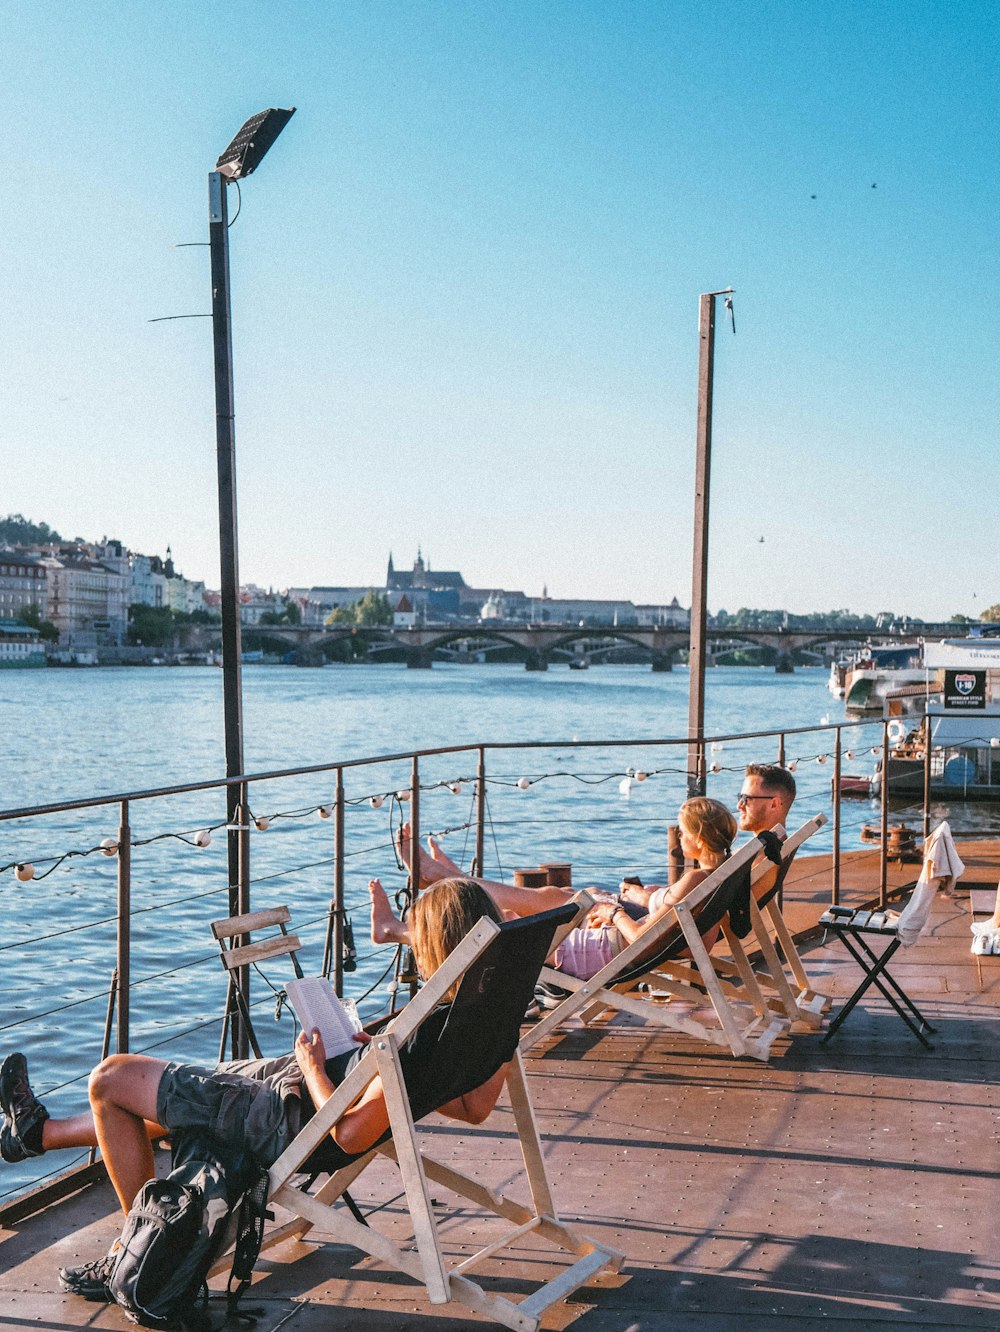 people sitting on chair near body of water during daytime